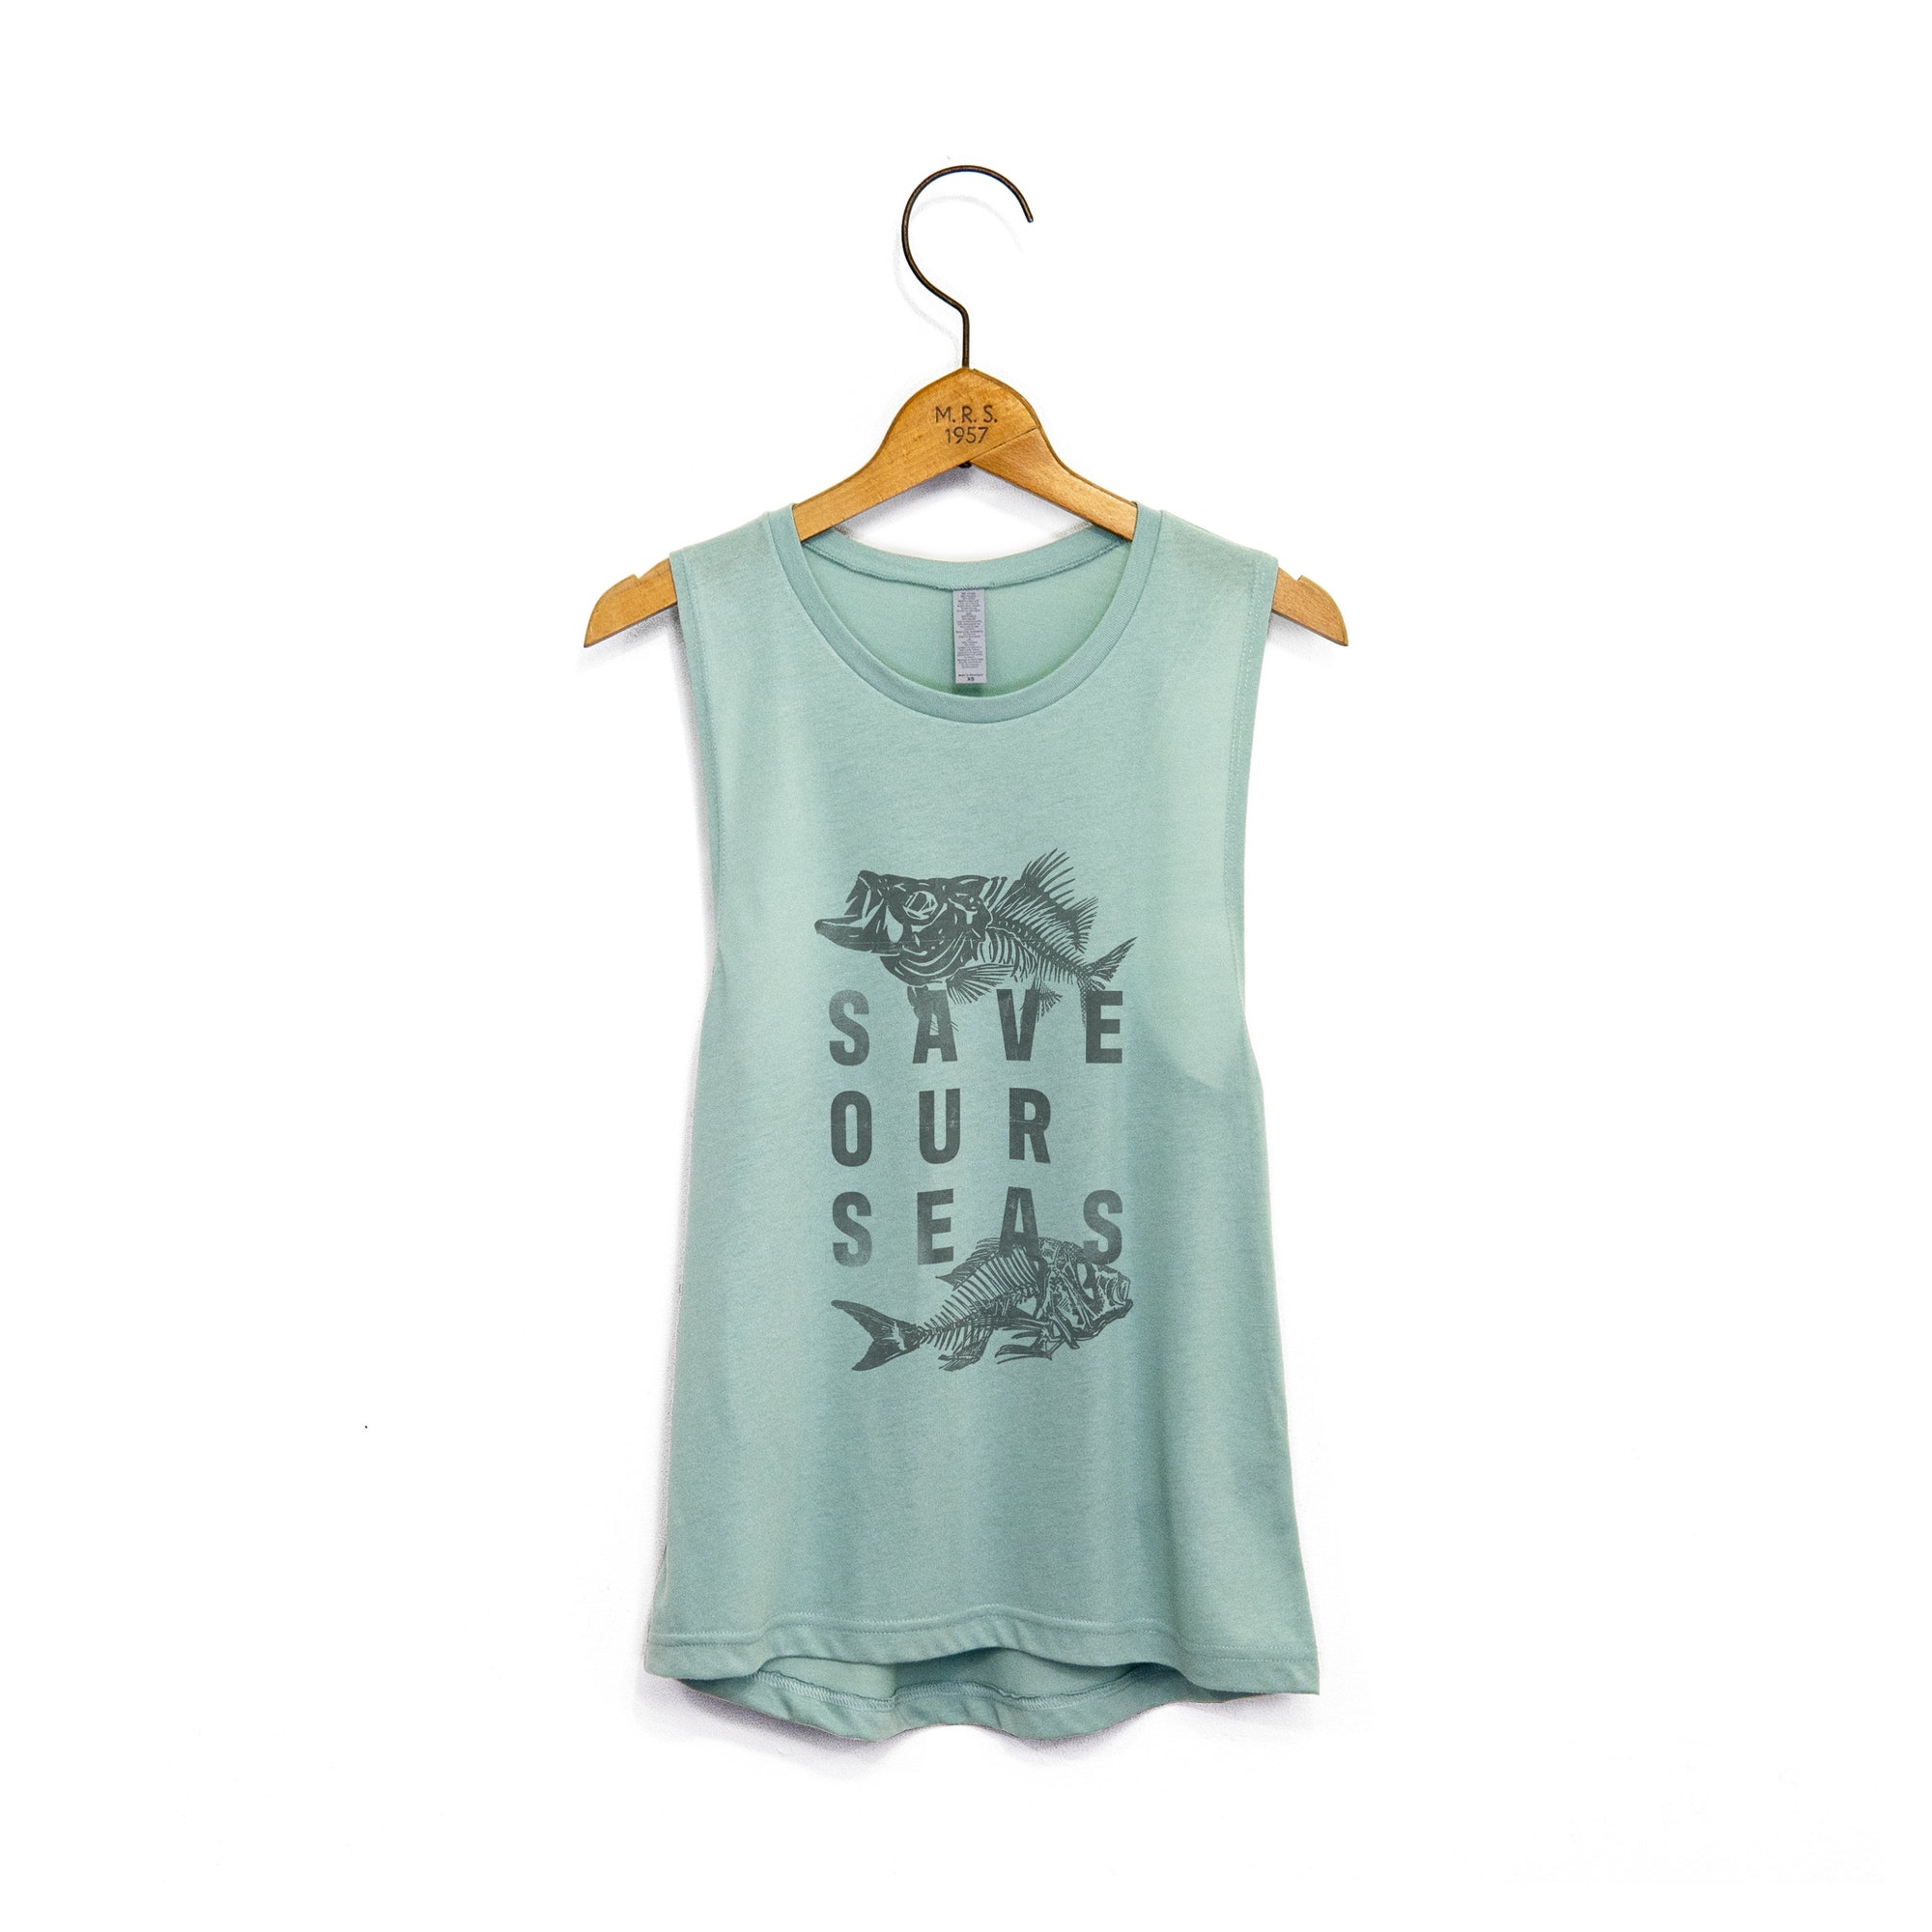 Discover Women's 'Save Our Seas' Surfer-Style Muscle Fit Tank Top